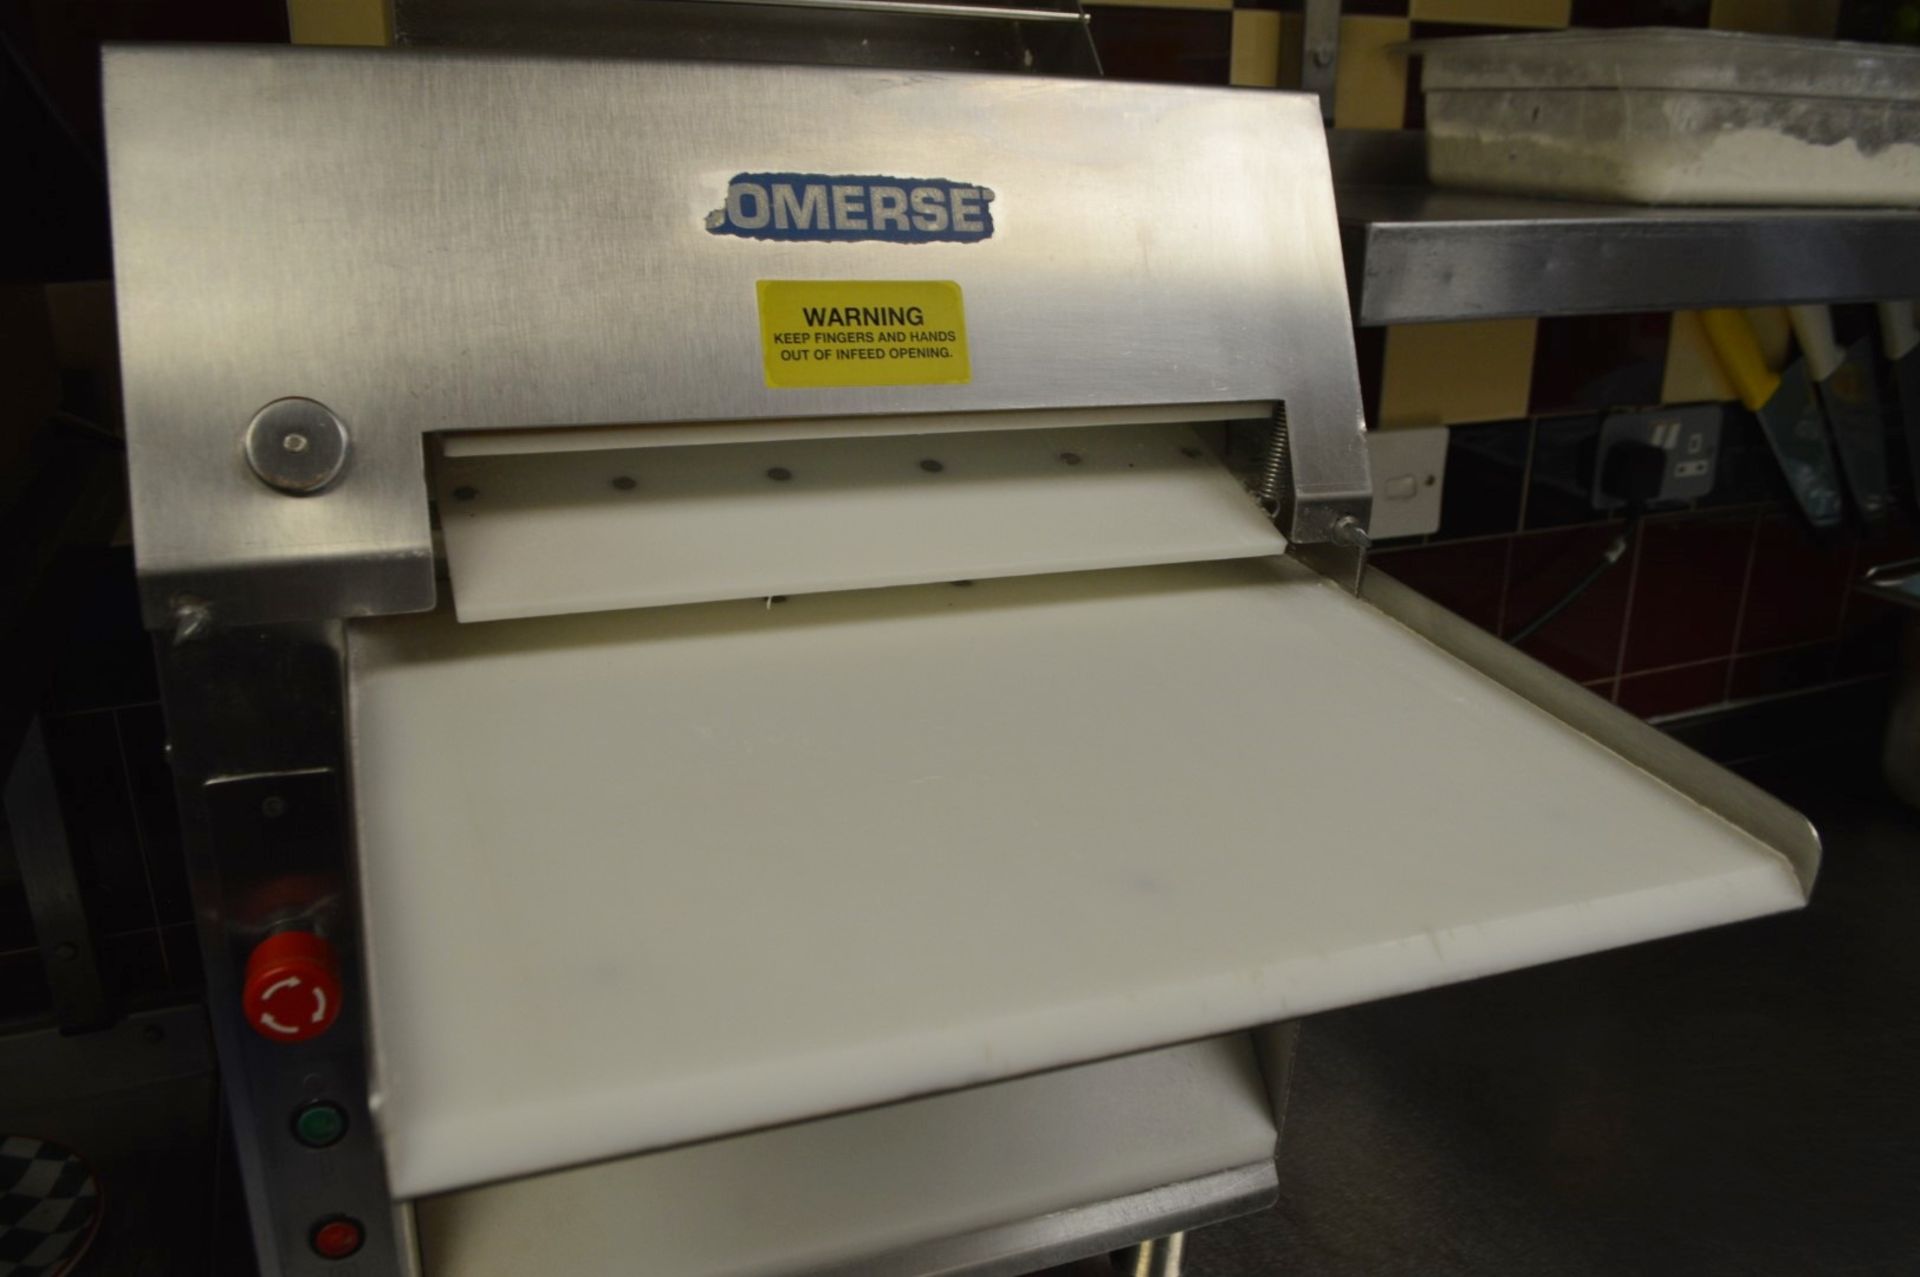 1 x Somerset Dough Roller - Model CDR1550 - Suitable For Pizza, Naans, Chatati Wraps etc - Ref FB180 - Image 4 of 6